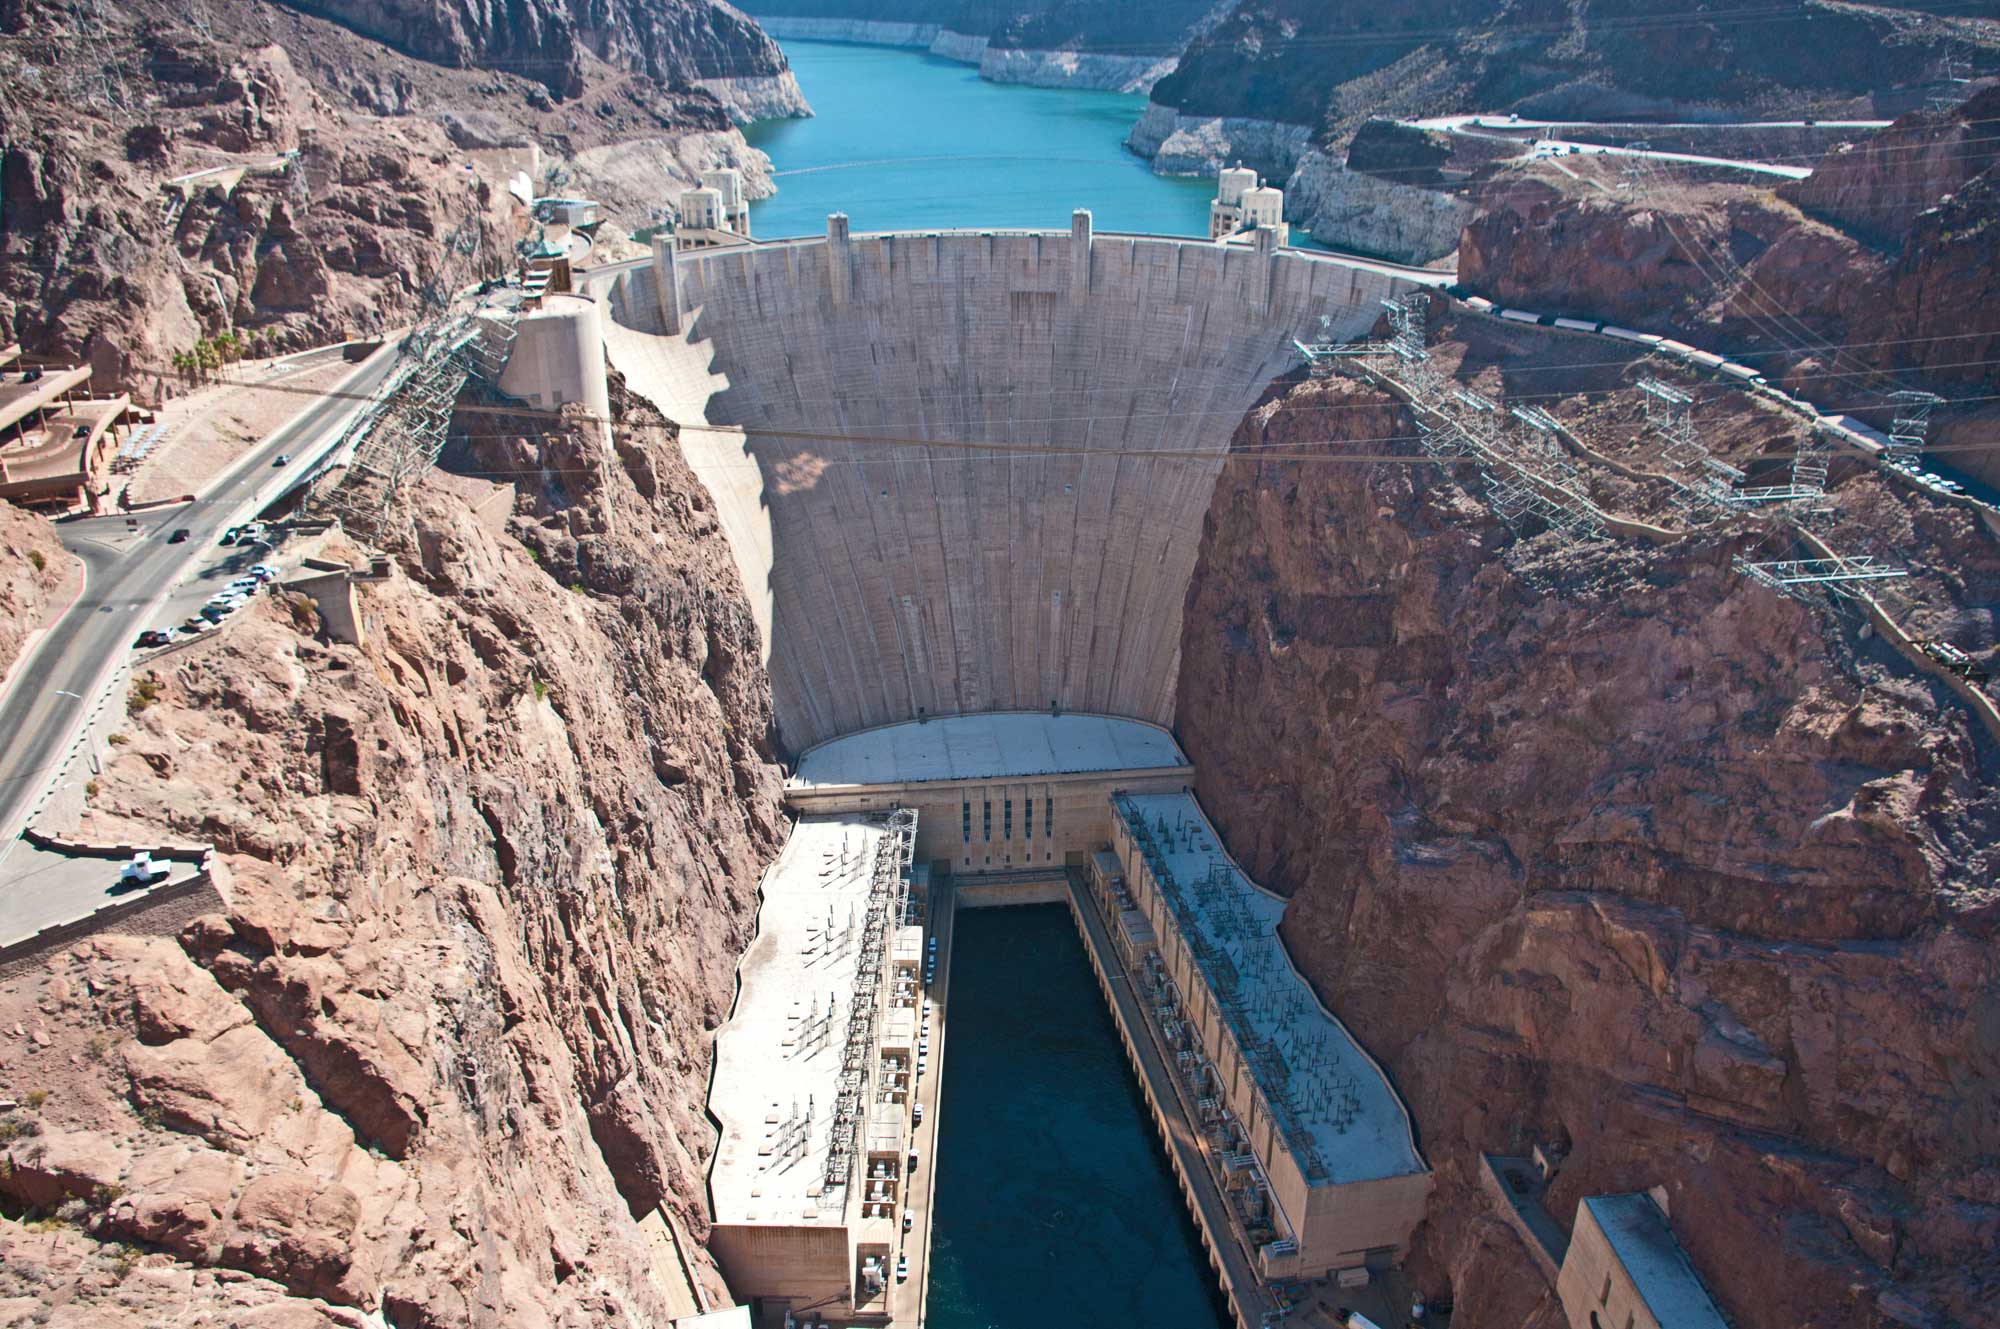 Photograph of Hoover Dam on the Arizona-Nevada border. The dam is a large cement wall holding back water upriver. Downriver (foreground), the water is much lower and hydroelectric structures can be seen. The rocks surrounding the river in front of the dam form red cliffs.